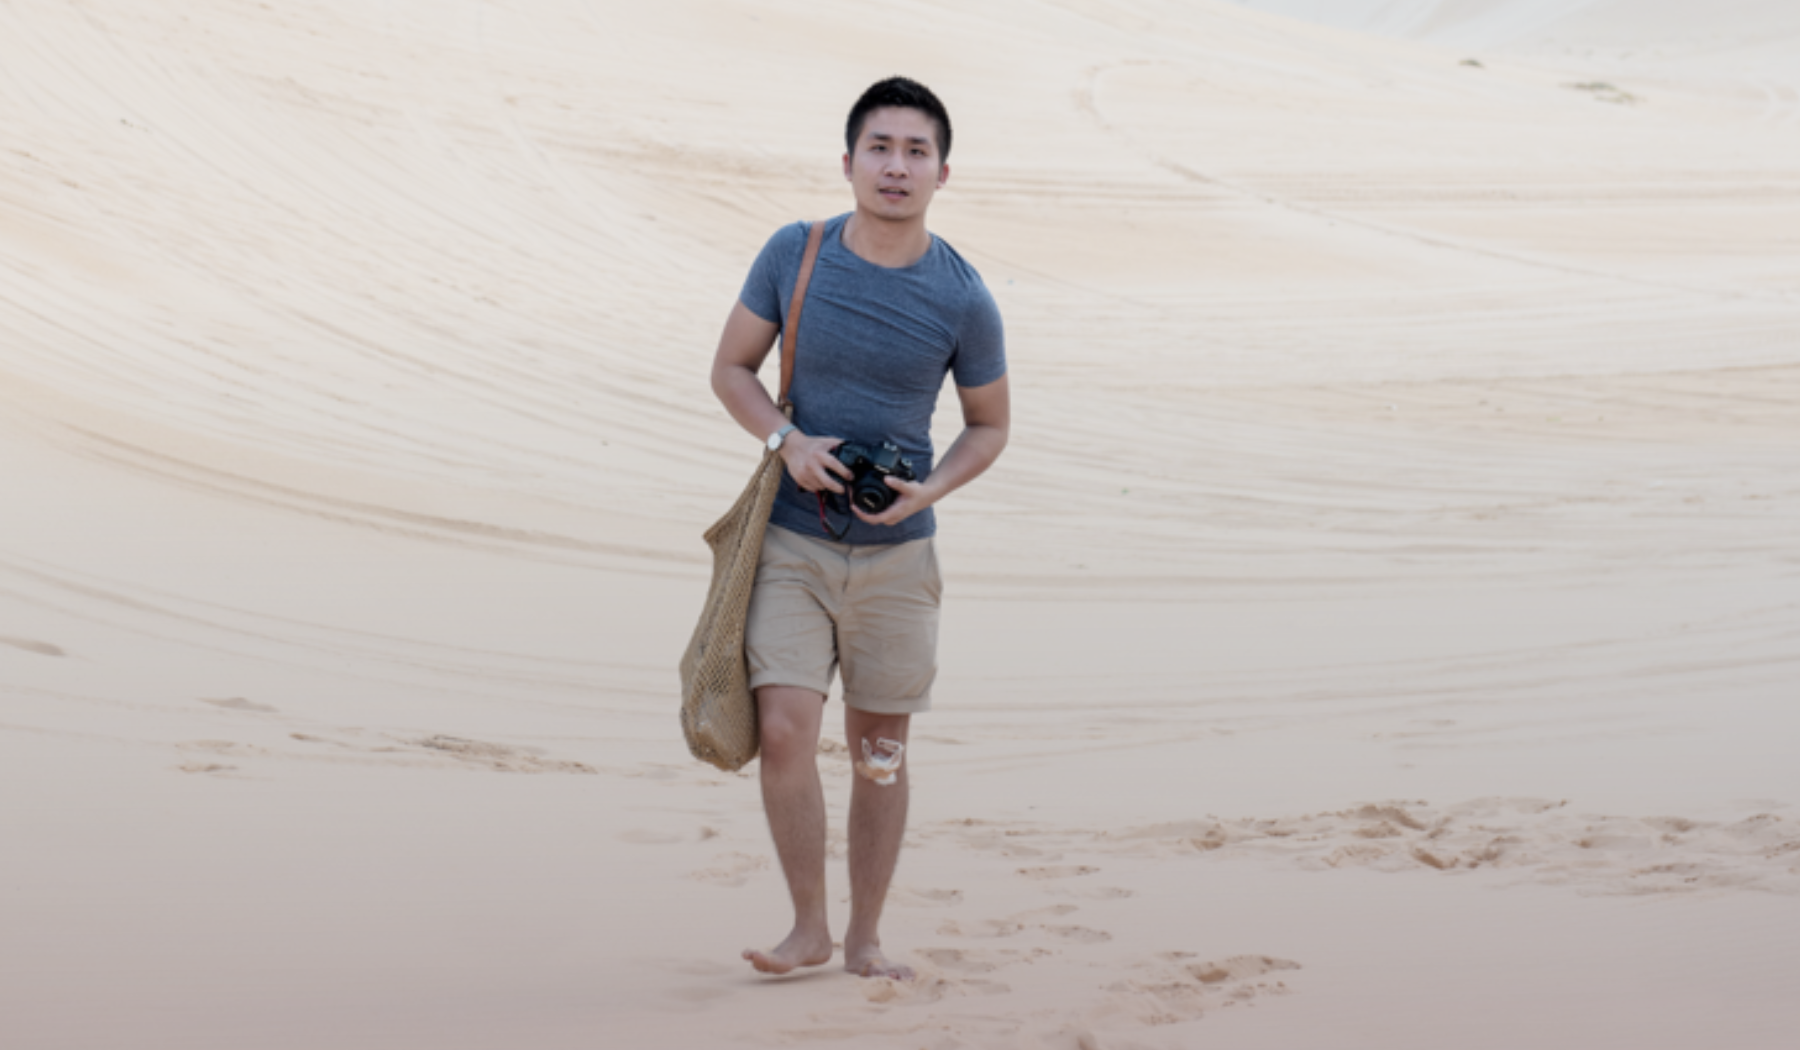 Supplied: Jaron Soh walking in sand, wearing blue tshirt and beige shorts